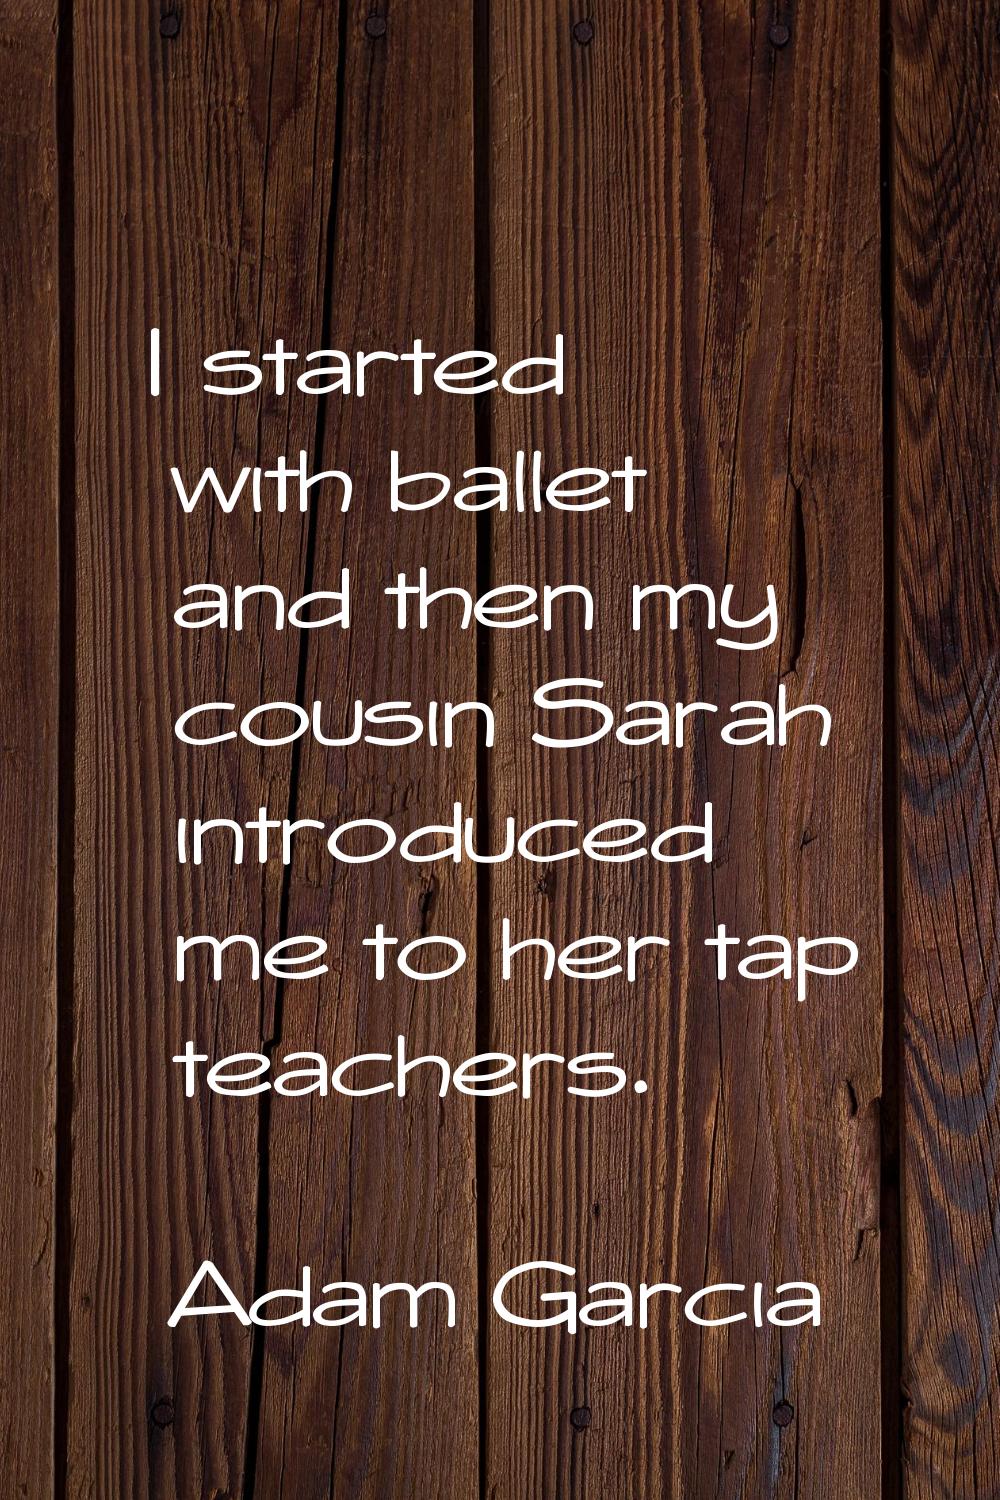 I started with ballet and then my cousin Sarah introduced me to her tap teachers.